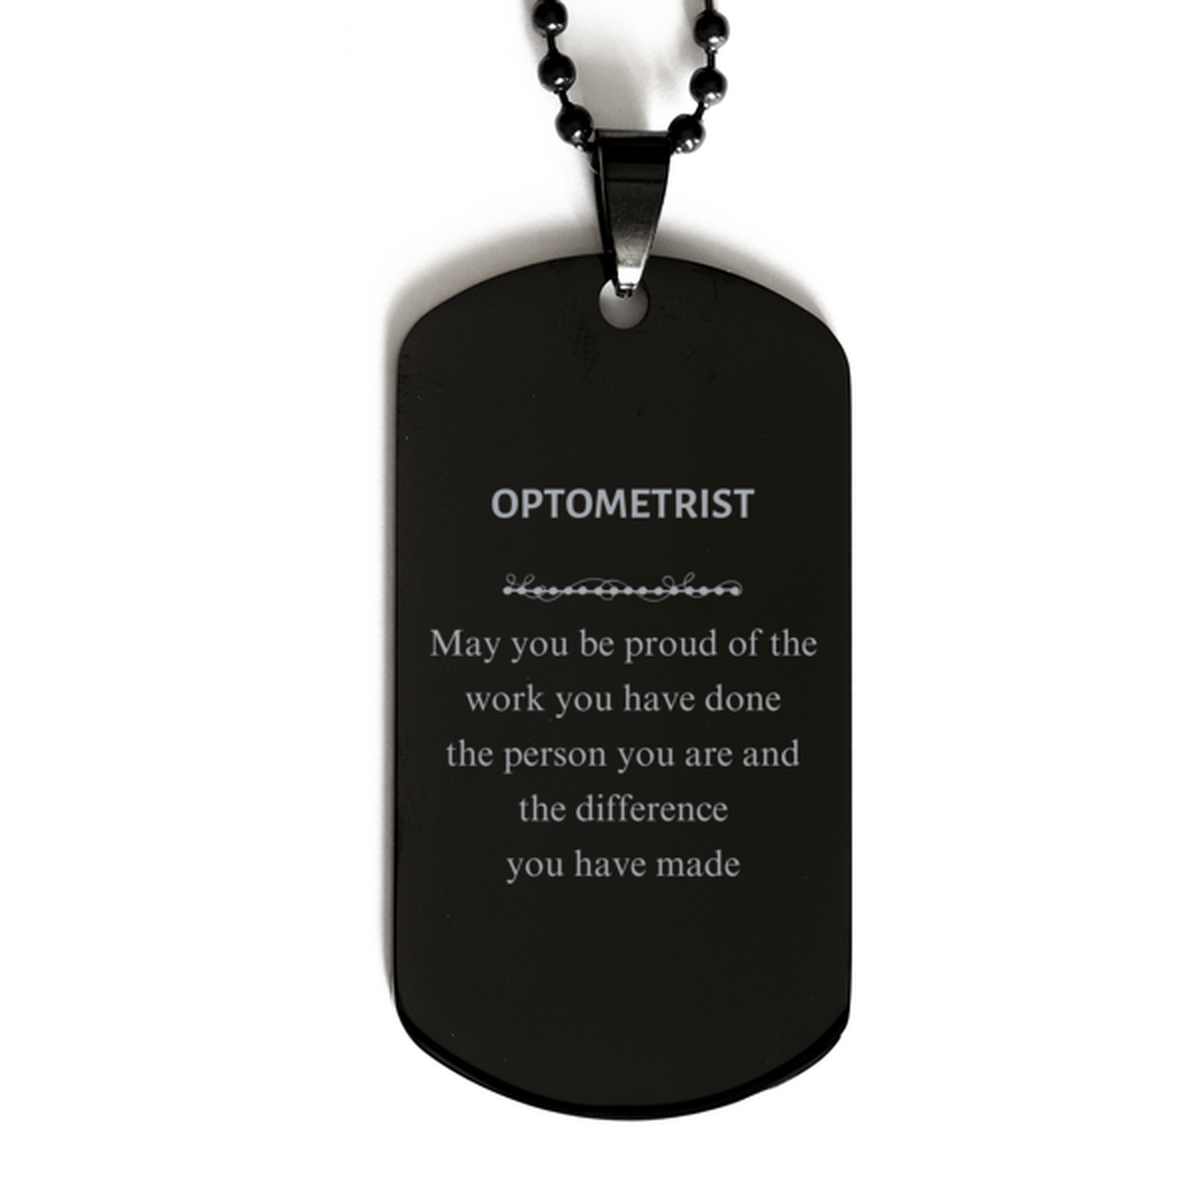 Optometrist May you be proud of the work you have done, Retirement Optometrist Black Dog Tag for Colleague Appreciation Gifts Amazing for Optometrist